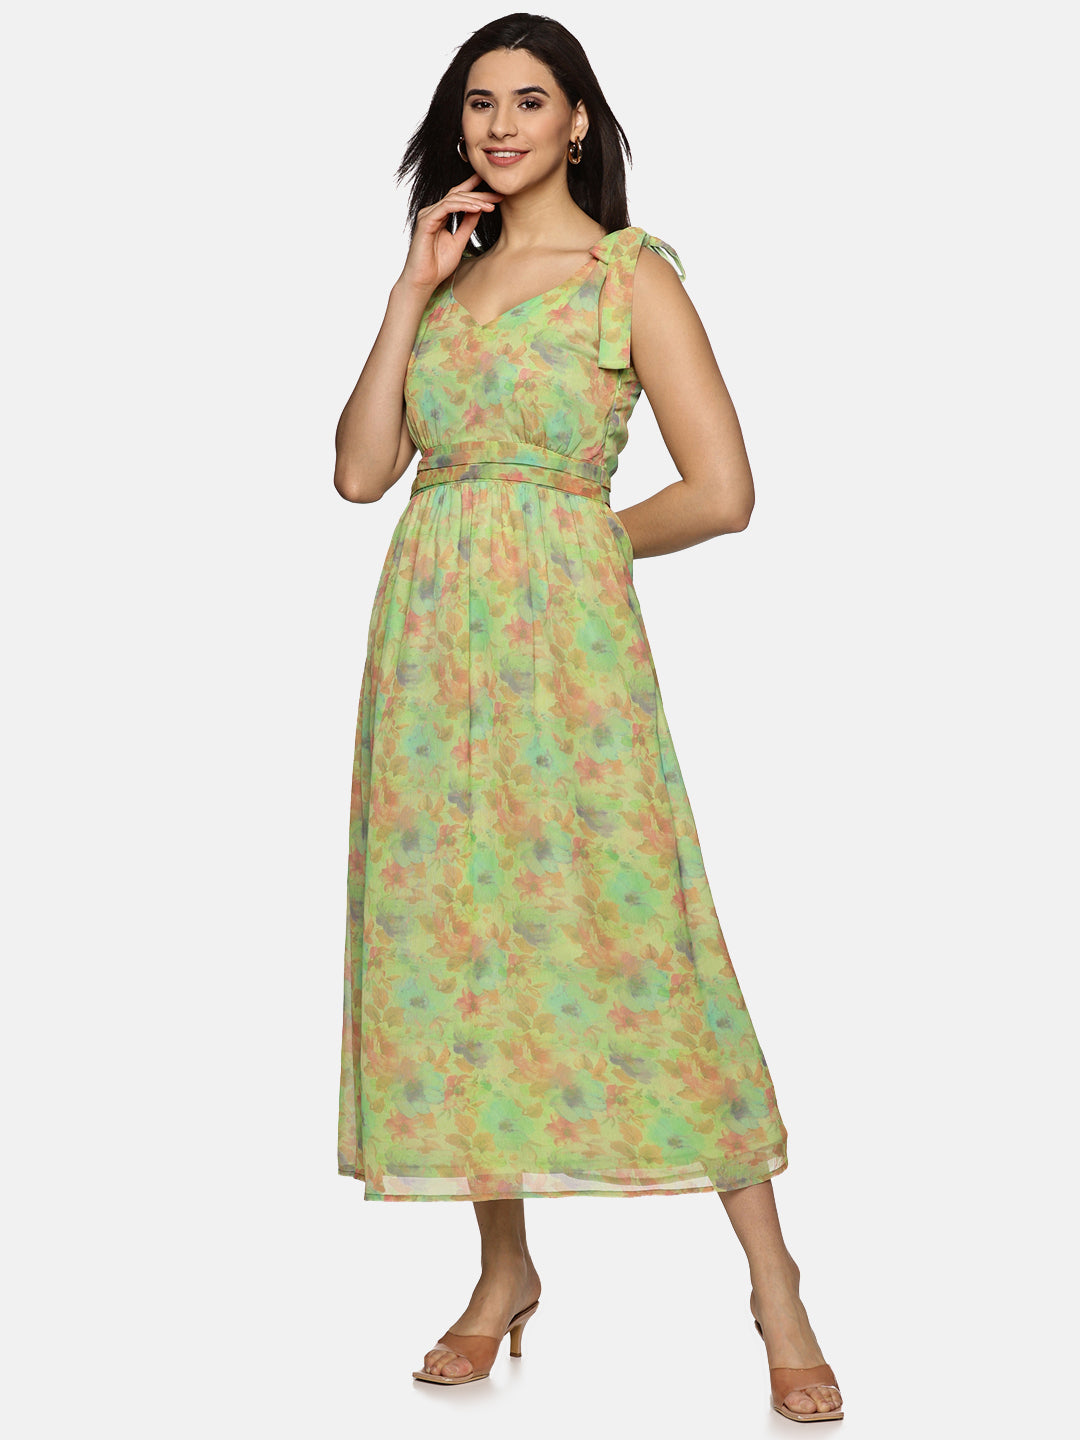 Buy Green Printed Floral Chiffon Fabric | Tie-up Detailed Dress Online In India